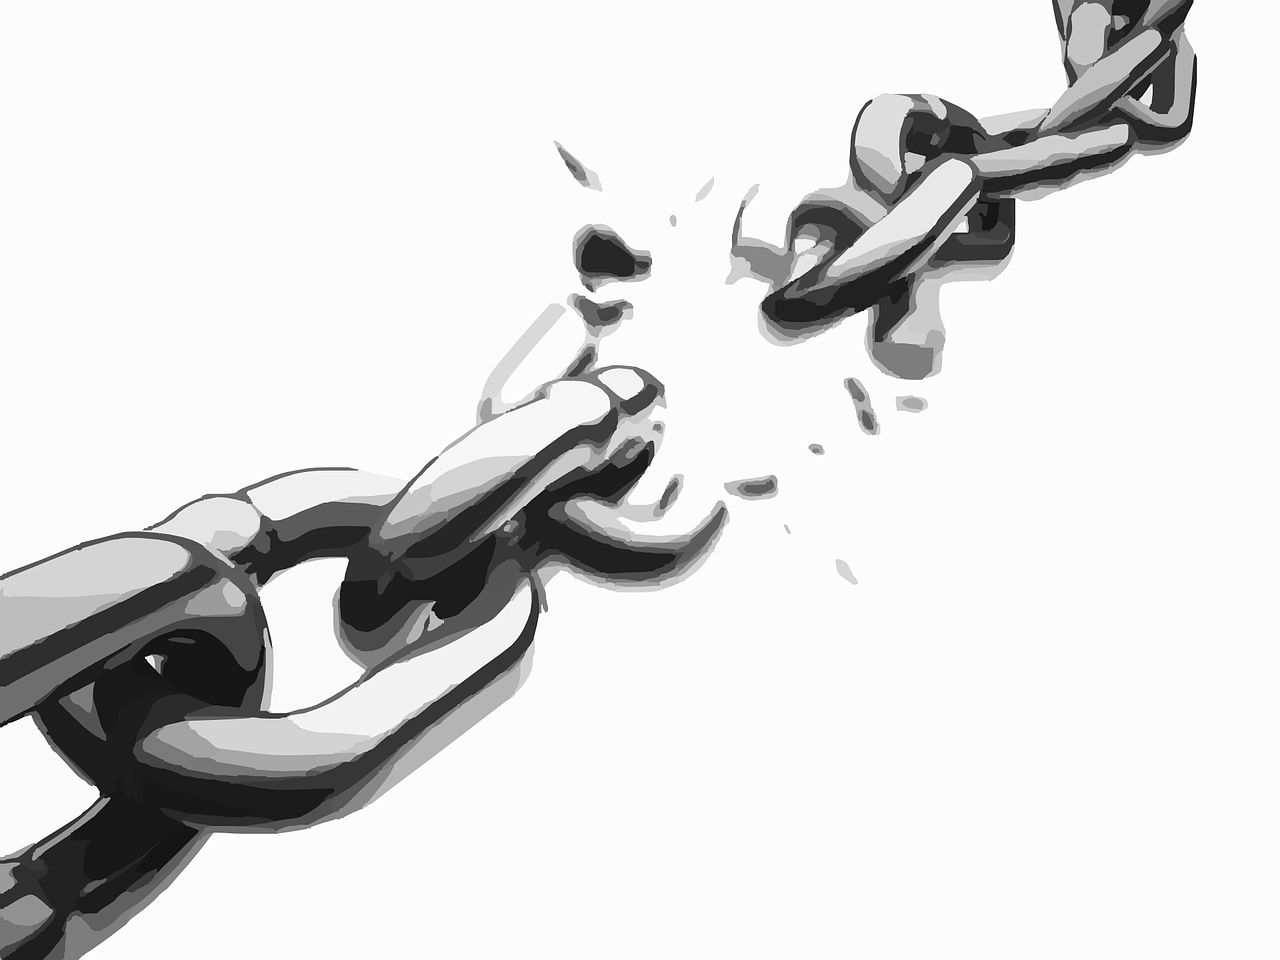 Chain,broken,link,freedom,unleashed - free image from needpix.com